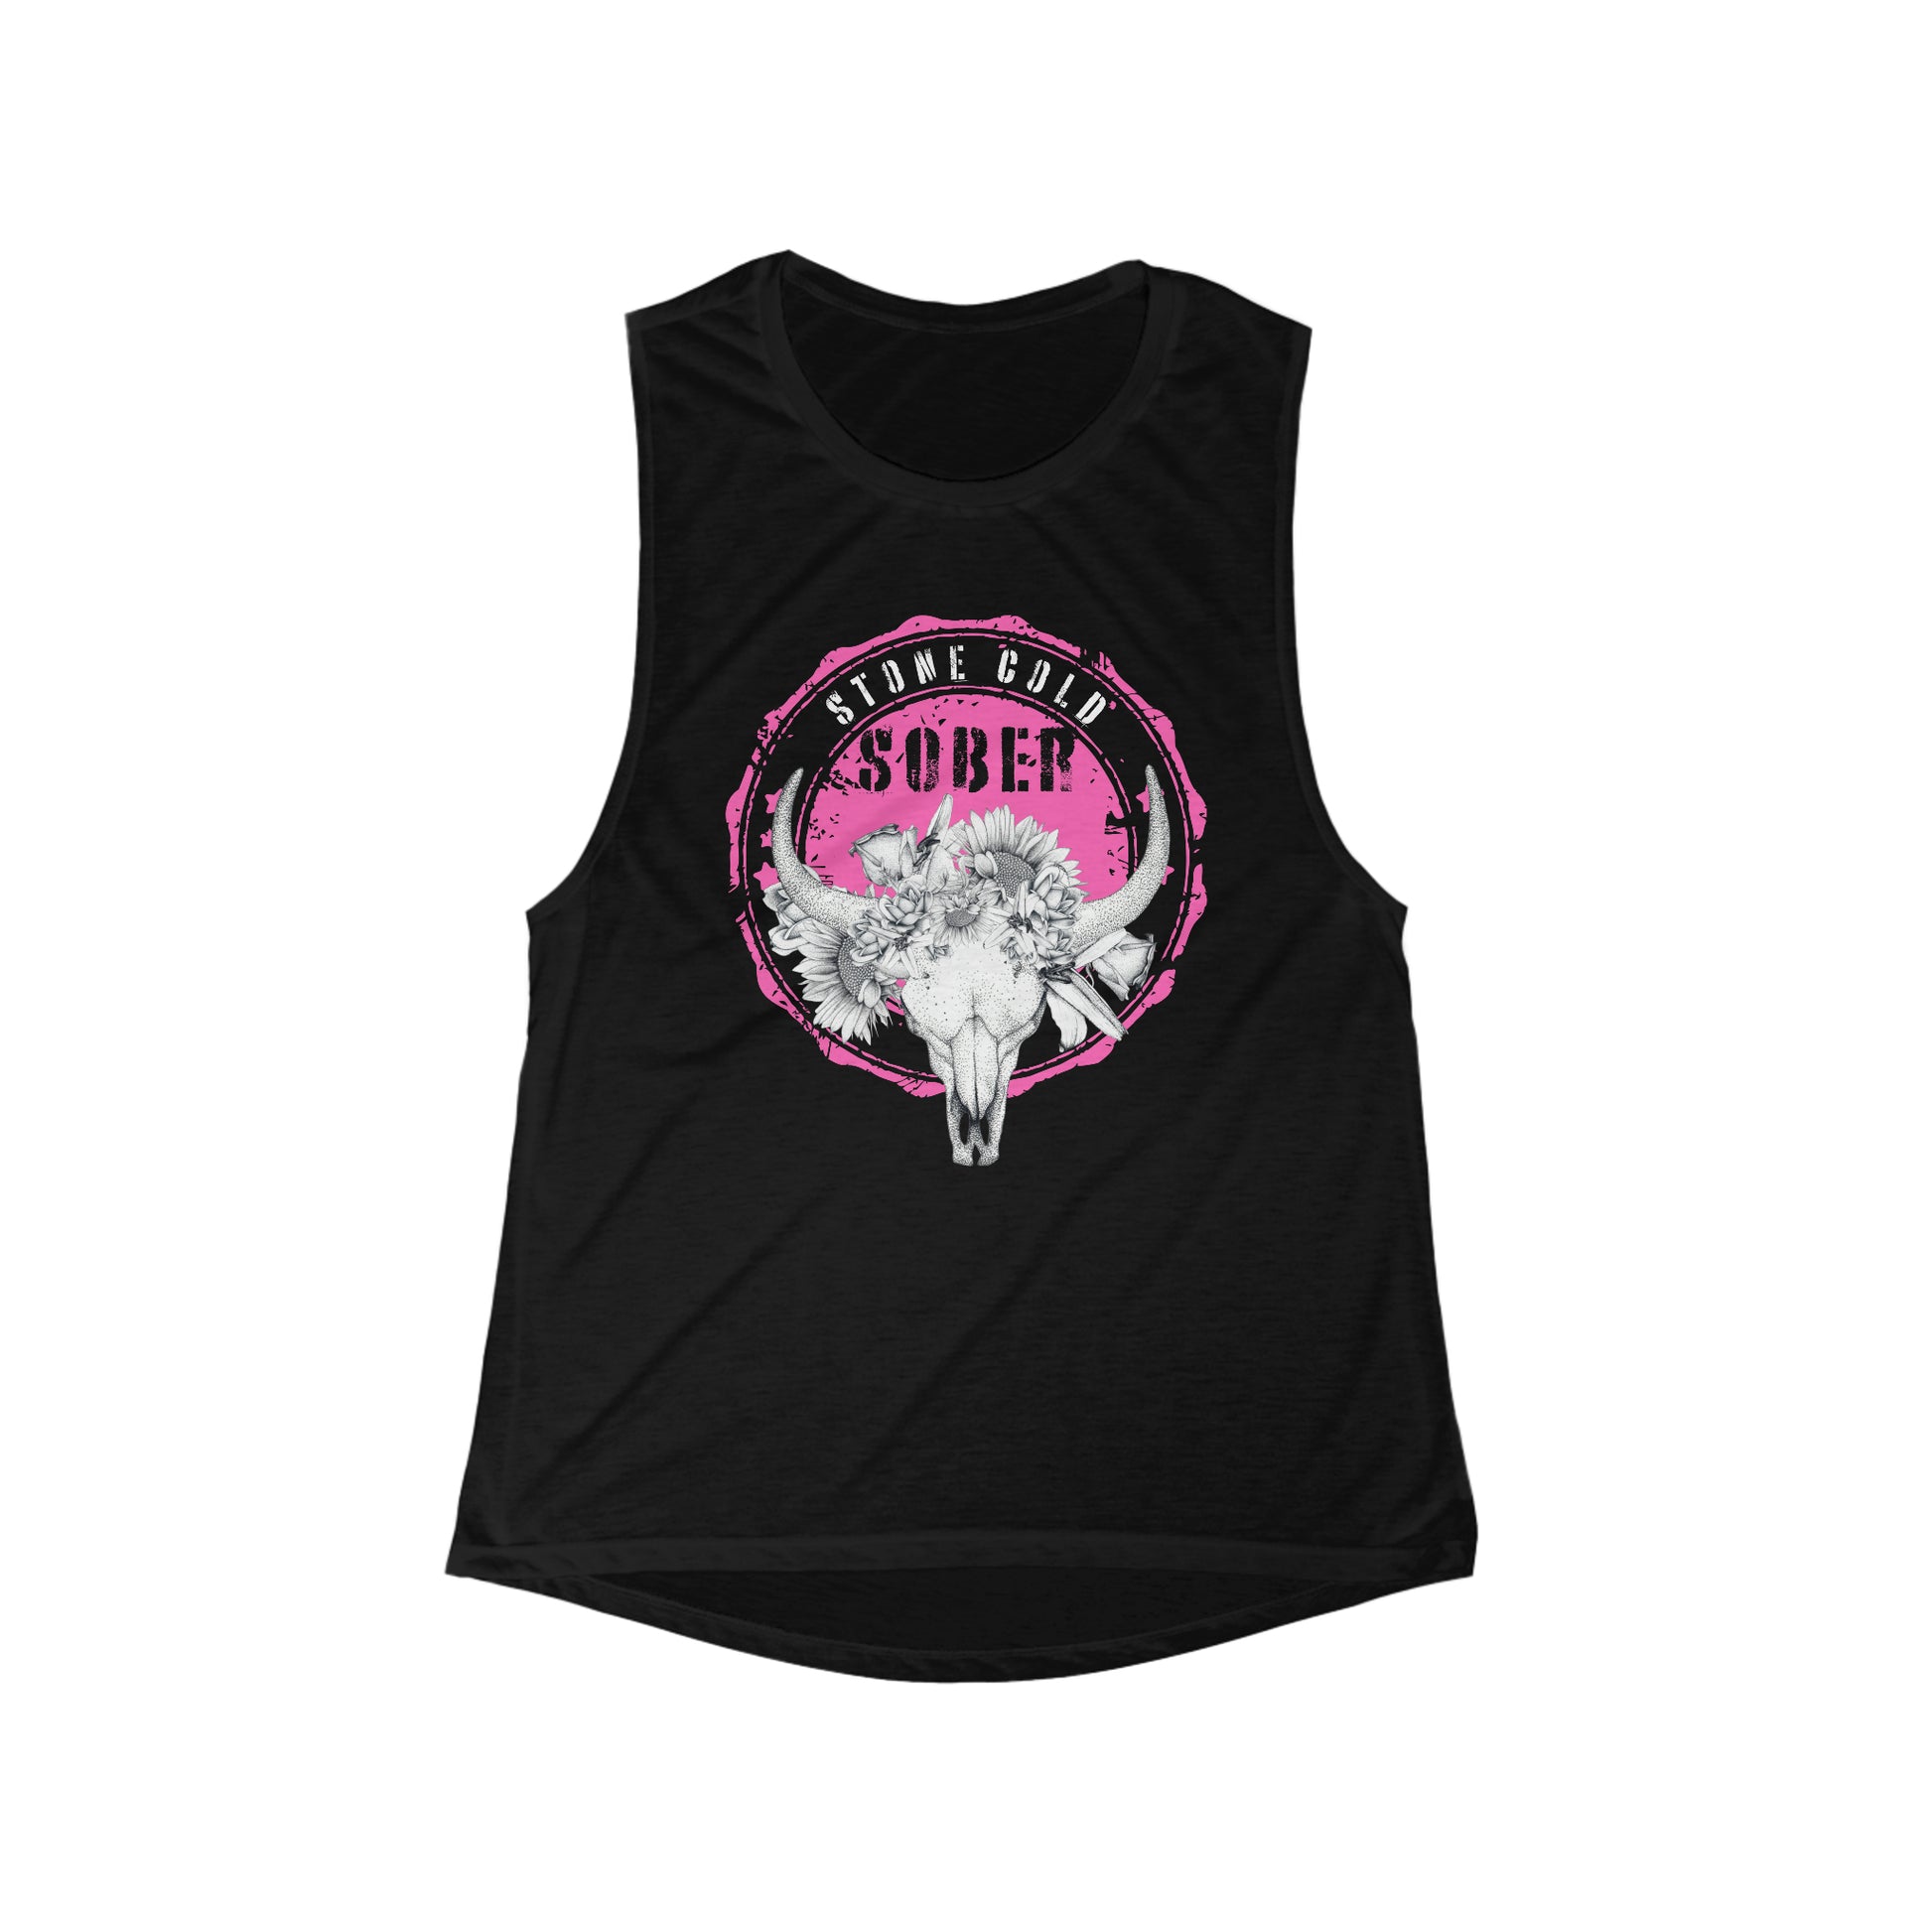 "Stone Cold Sober" Women's Flowy Muscle Tank order today from Celebrate Sobriety Gifts.com